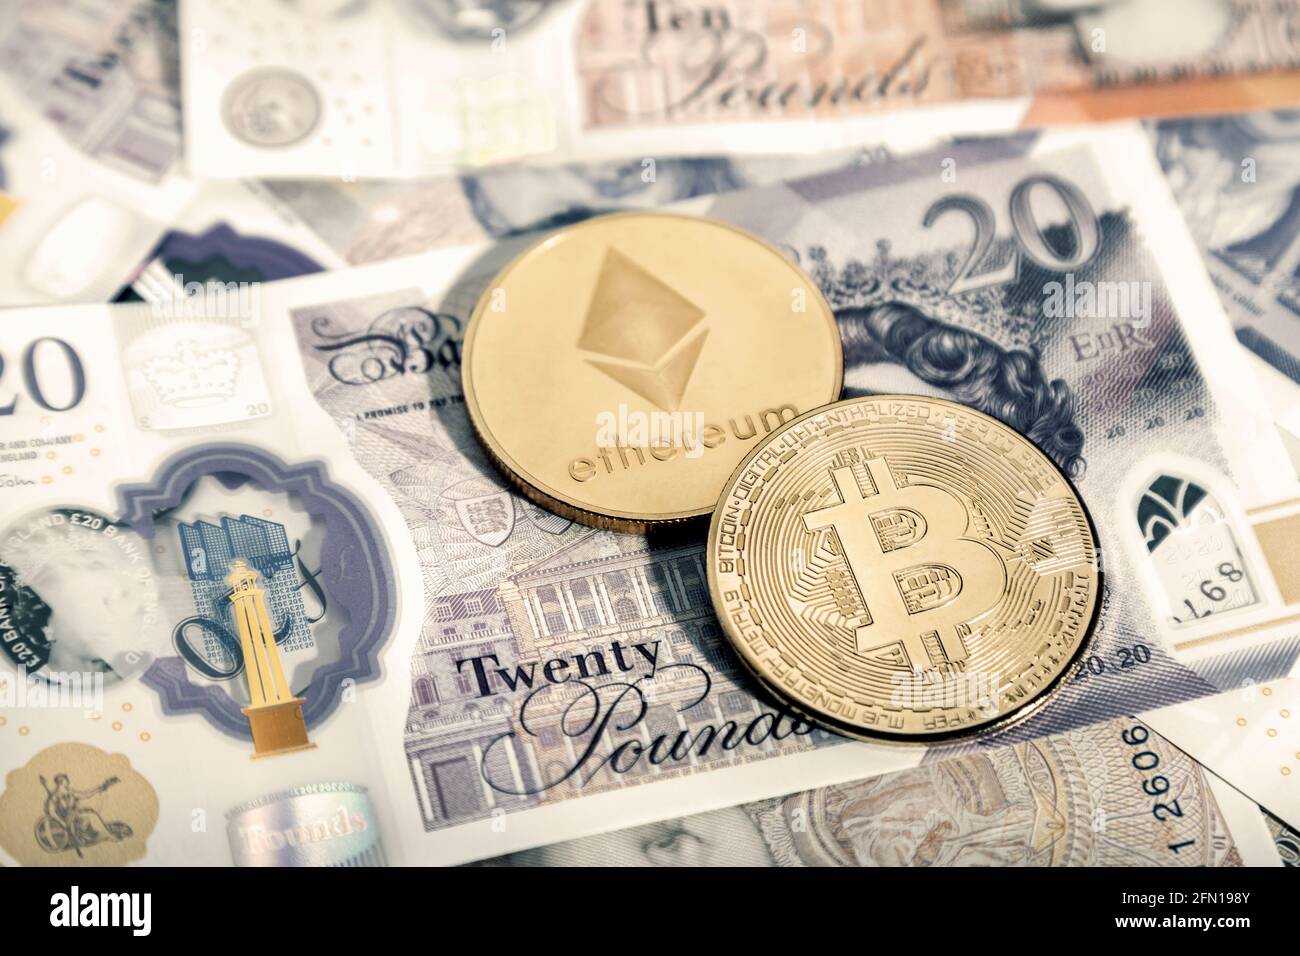 Cryptocurrency bitcoin and ether (ethereum) token coins against British Ponuds GBP Stock Photo